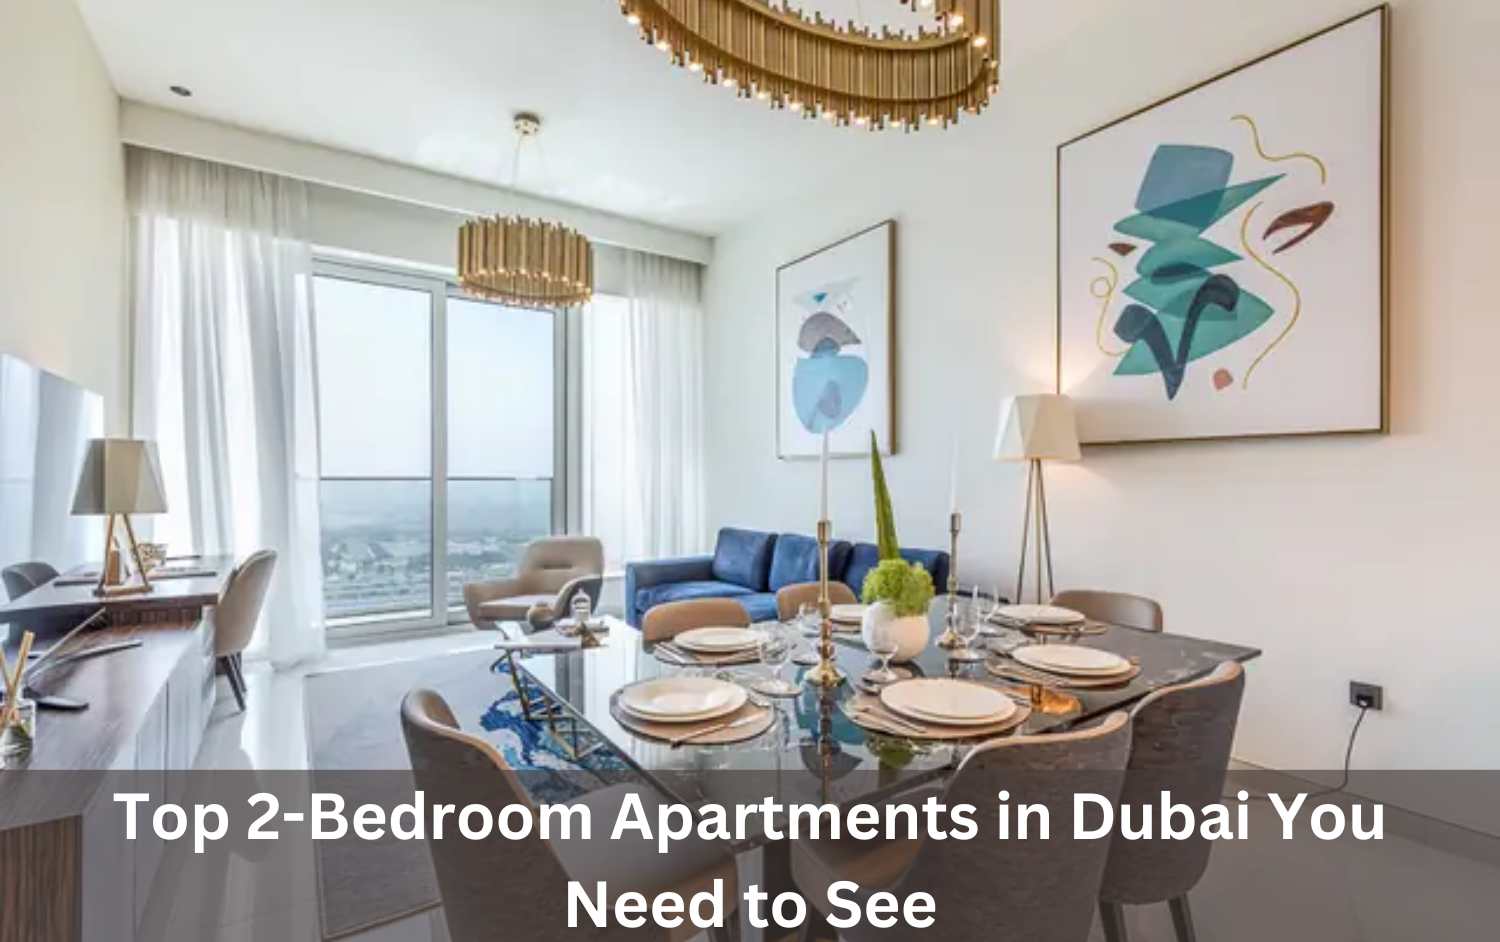 Top 2-Bedroom Apartments in Dubai You Need to See